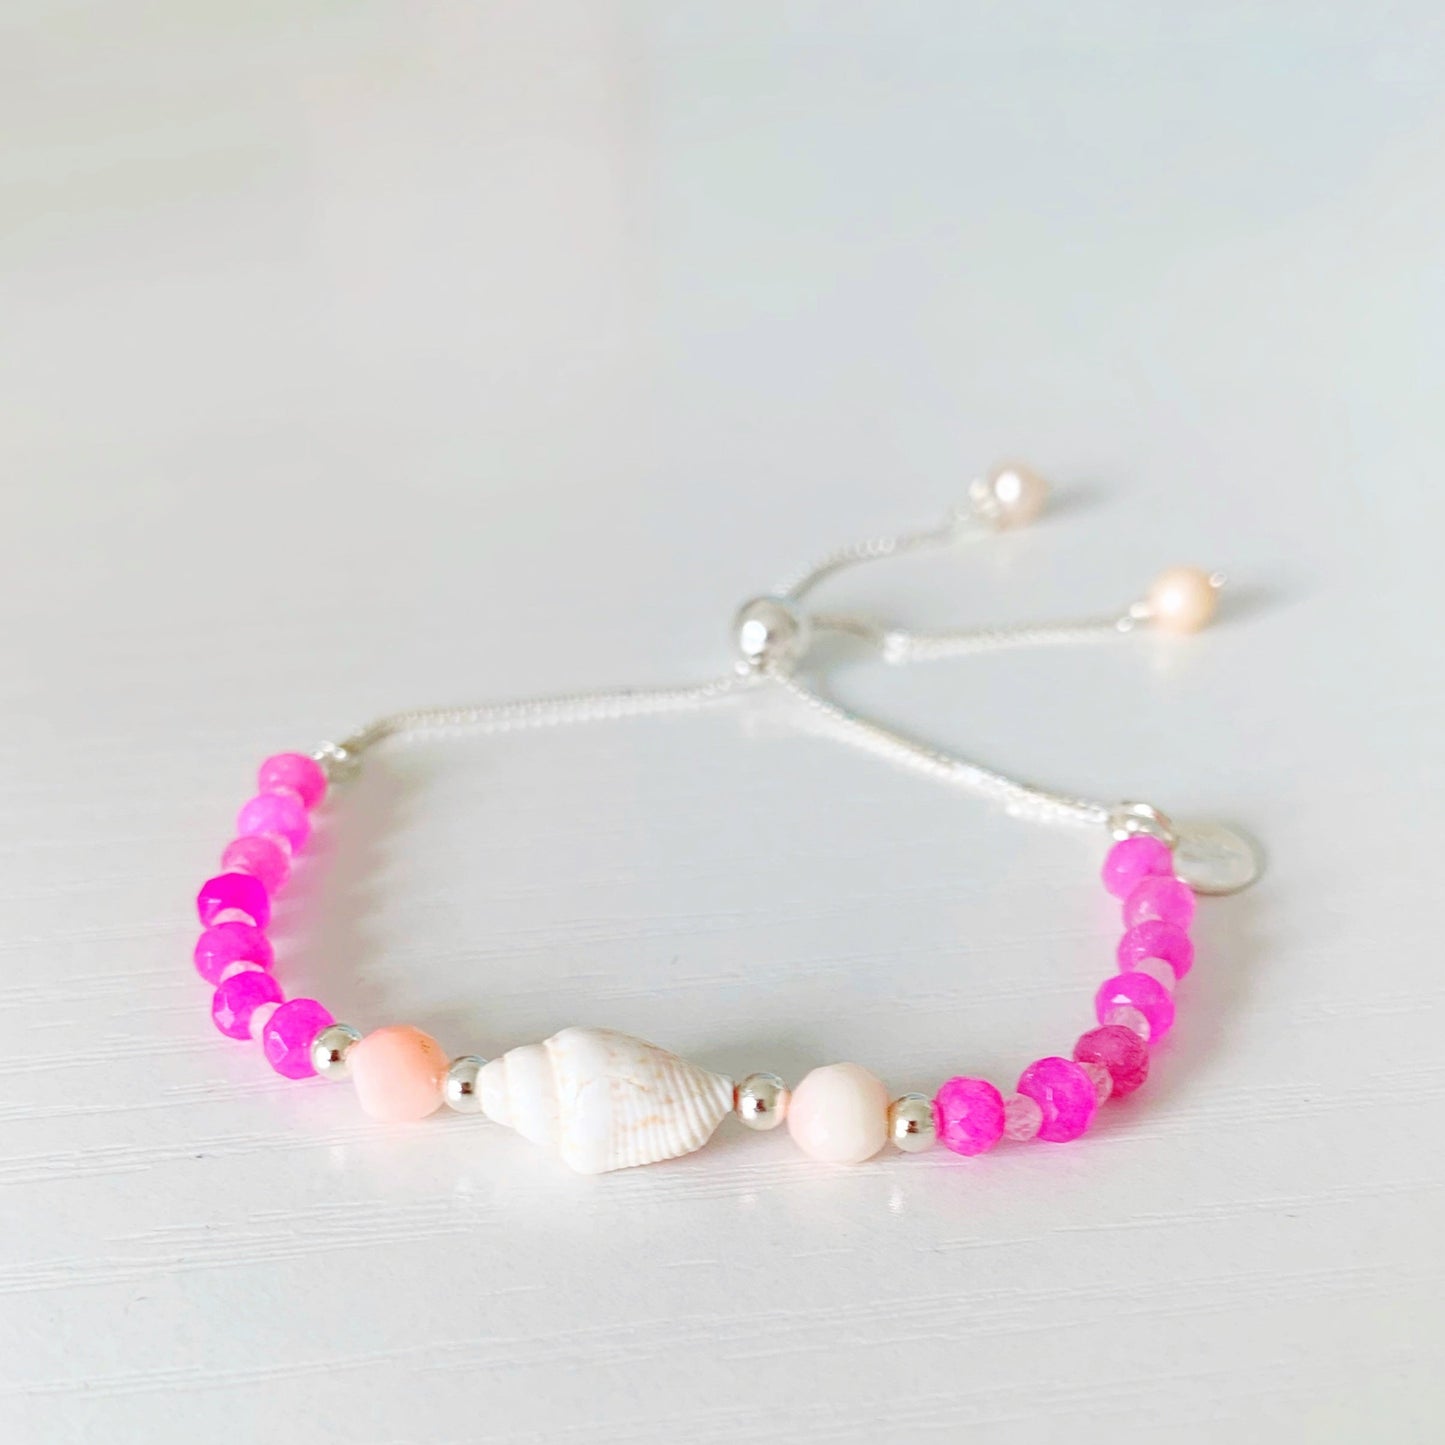 the pink flamingo shellebration bracelet by mermaids and madeleines is a sterling silver and beaded adjustable bracelet with a shell and coral beads at the center complimented by alternating dyed pink jade, rose quartz. this bracelet is photographed on a white surface